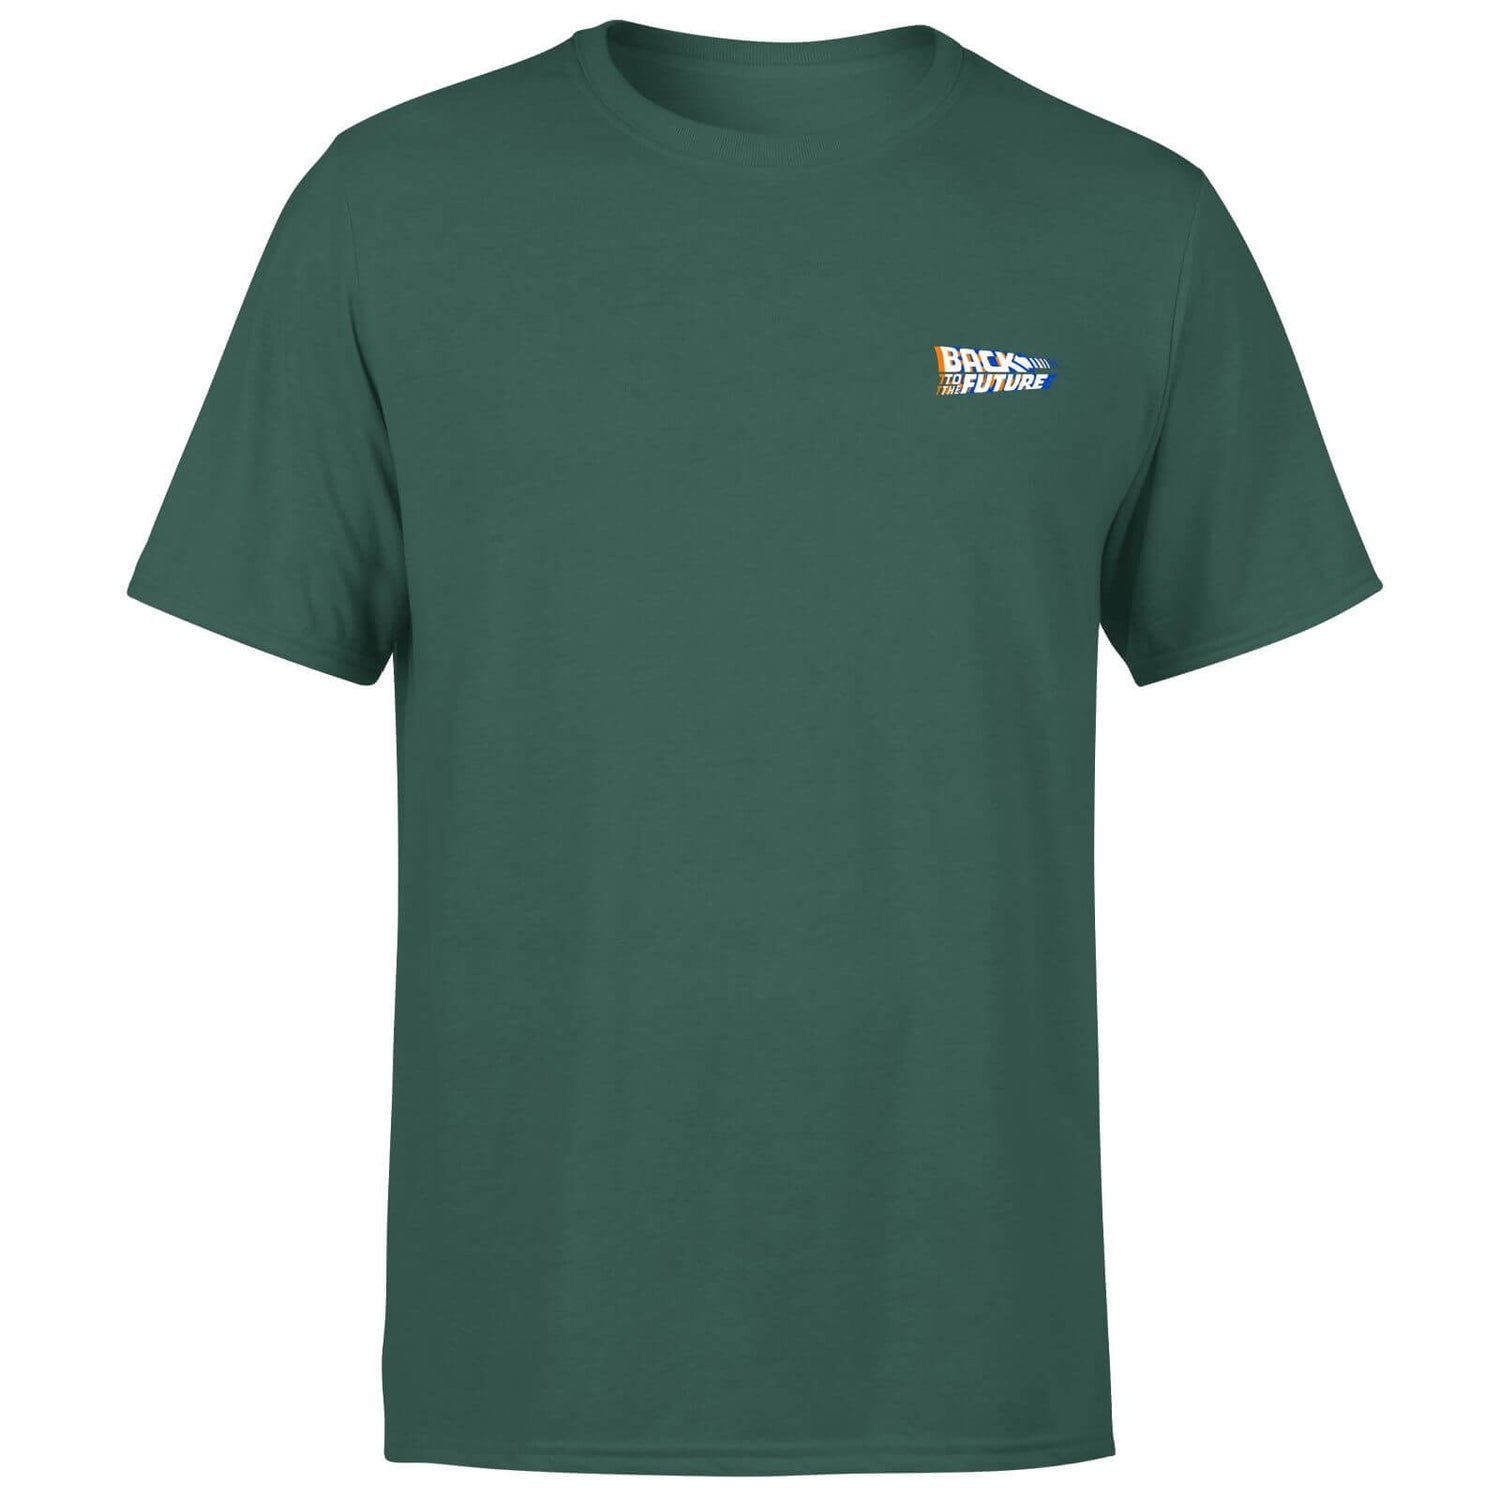 Back To The Future Men's T-Shirt - Green